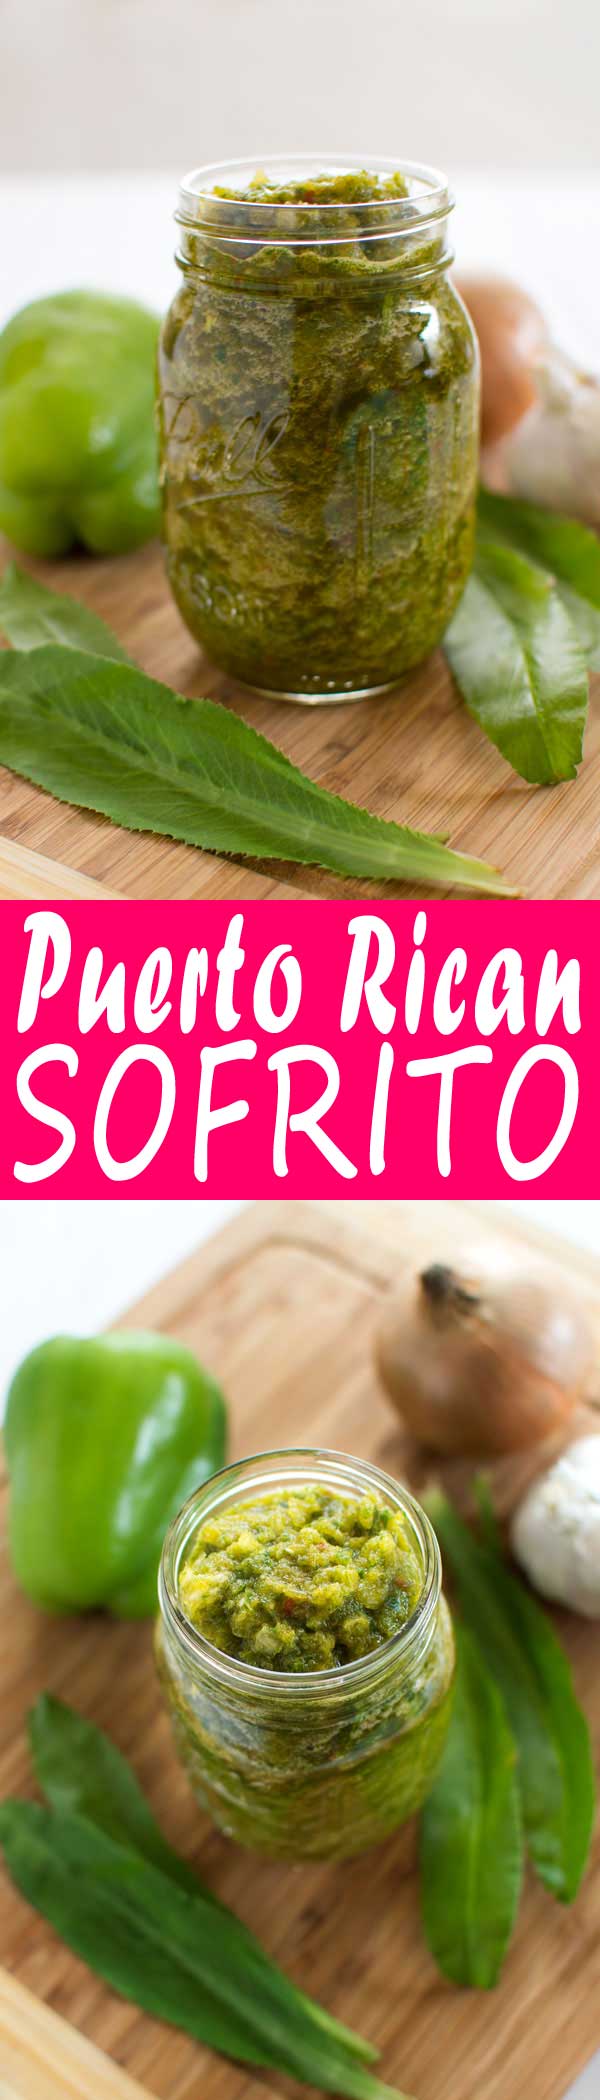 How to make Puerto Rican sofrito at home! Vegetables and herbs are blended together to form the flavor base for many Puerto Rican dishes.